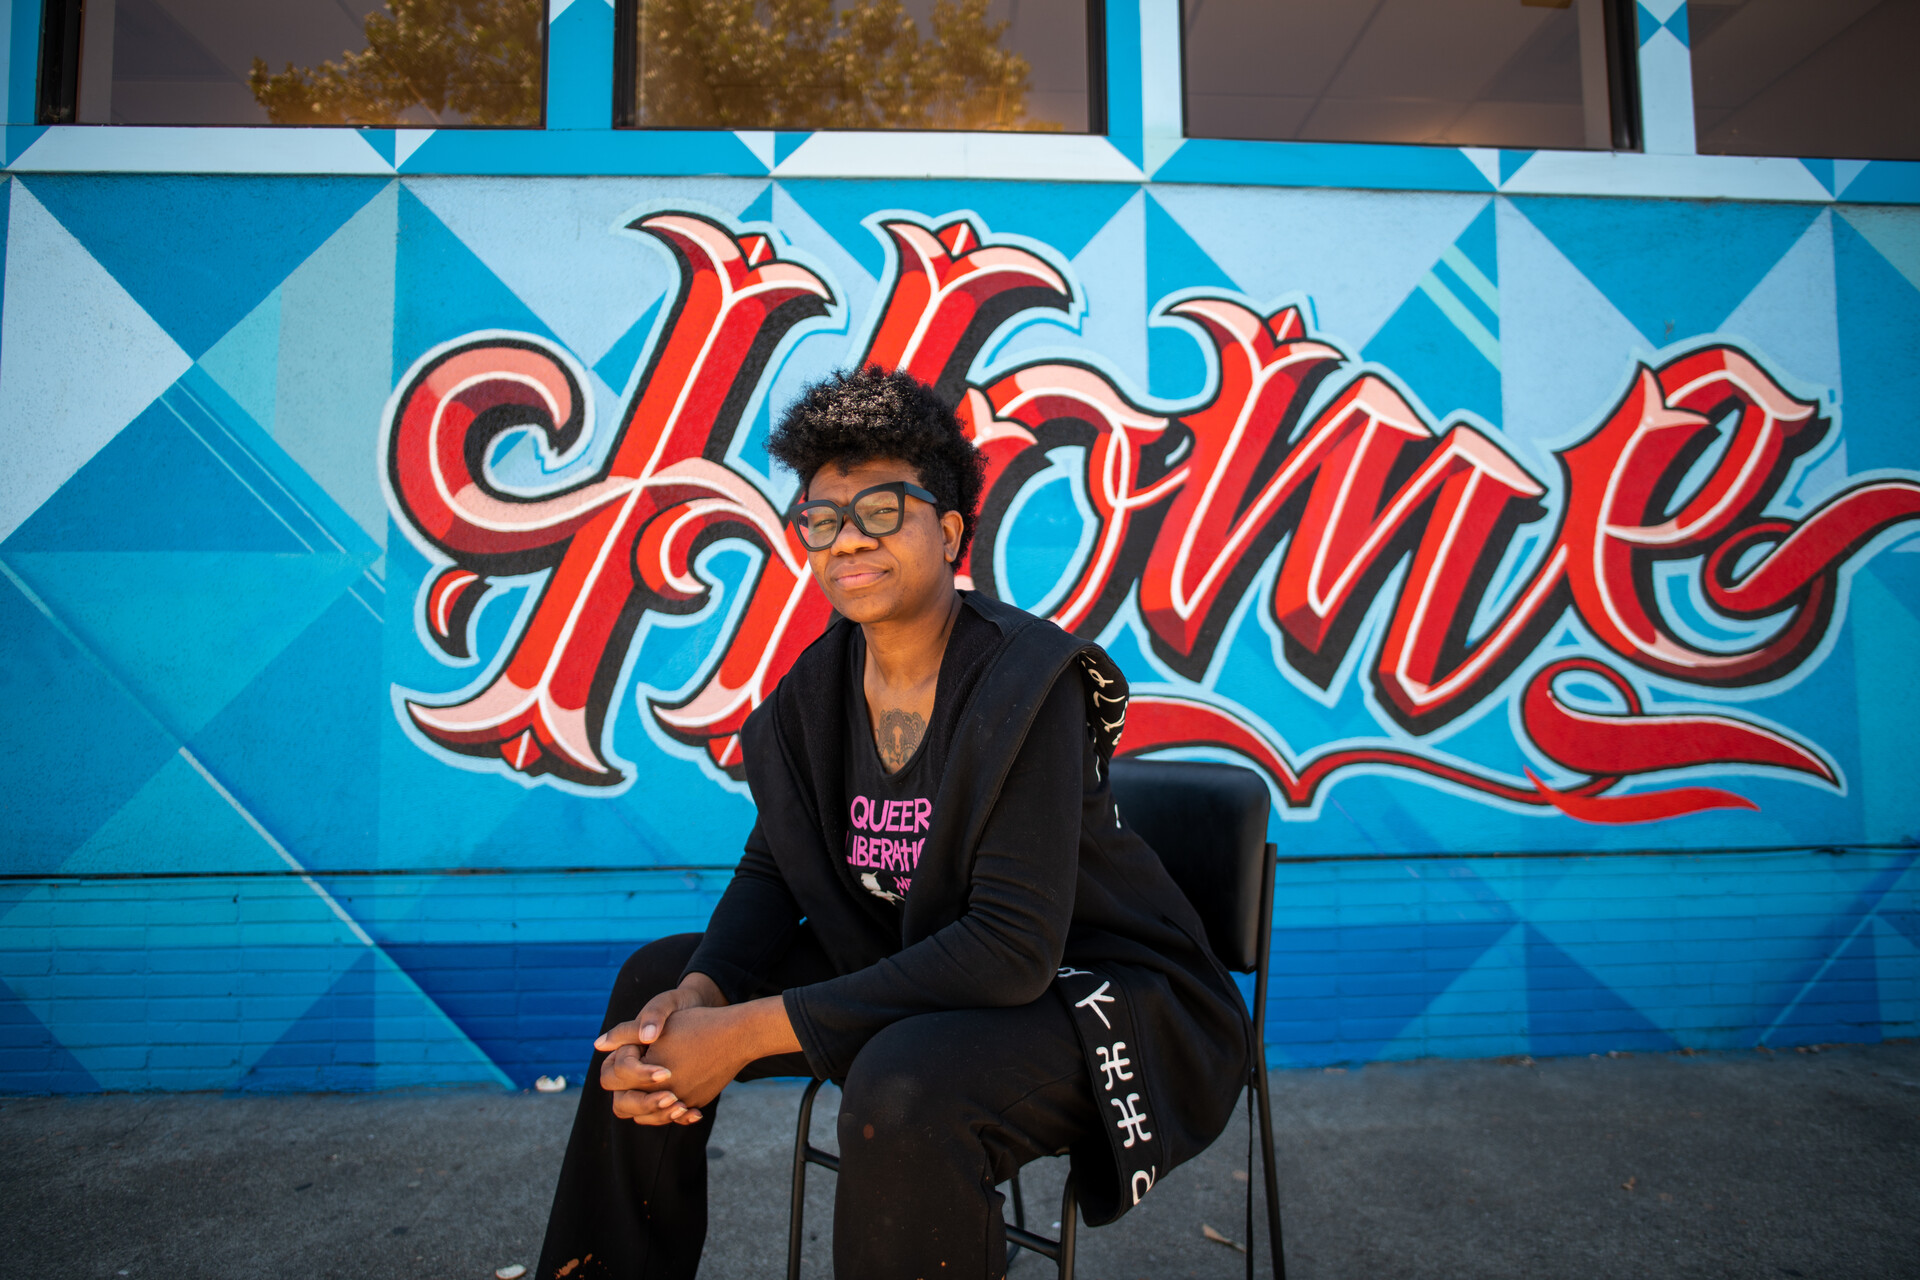 A black woman wearing a black suit and glasses sits in front of a blue and red mural that reads 